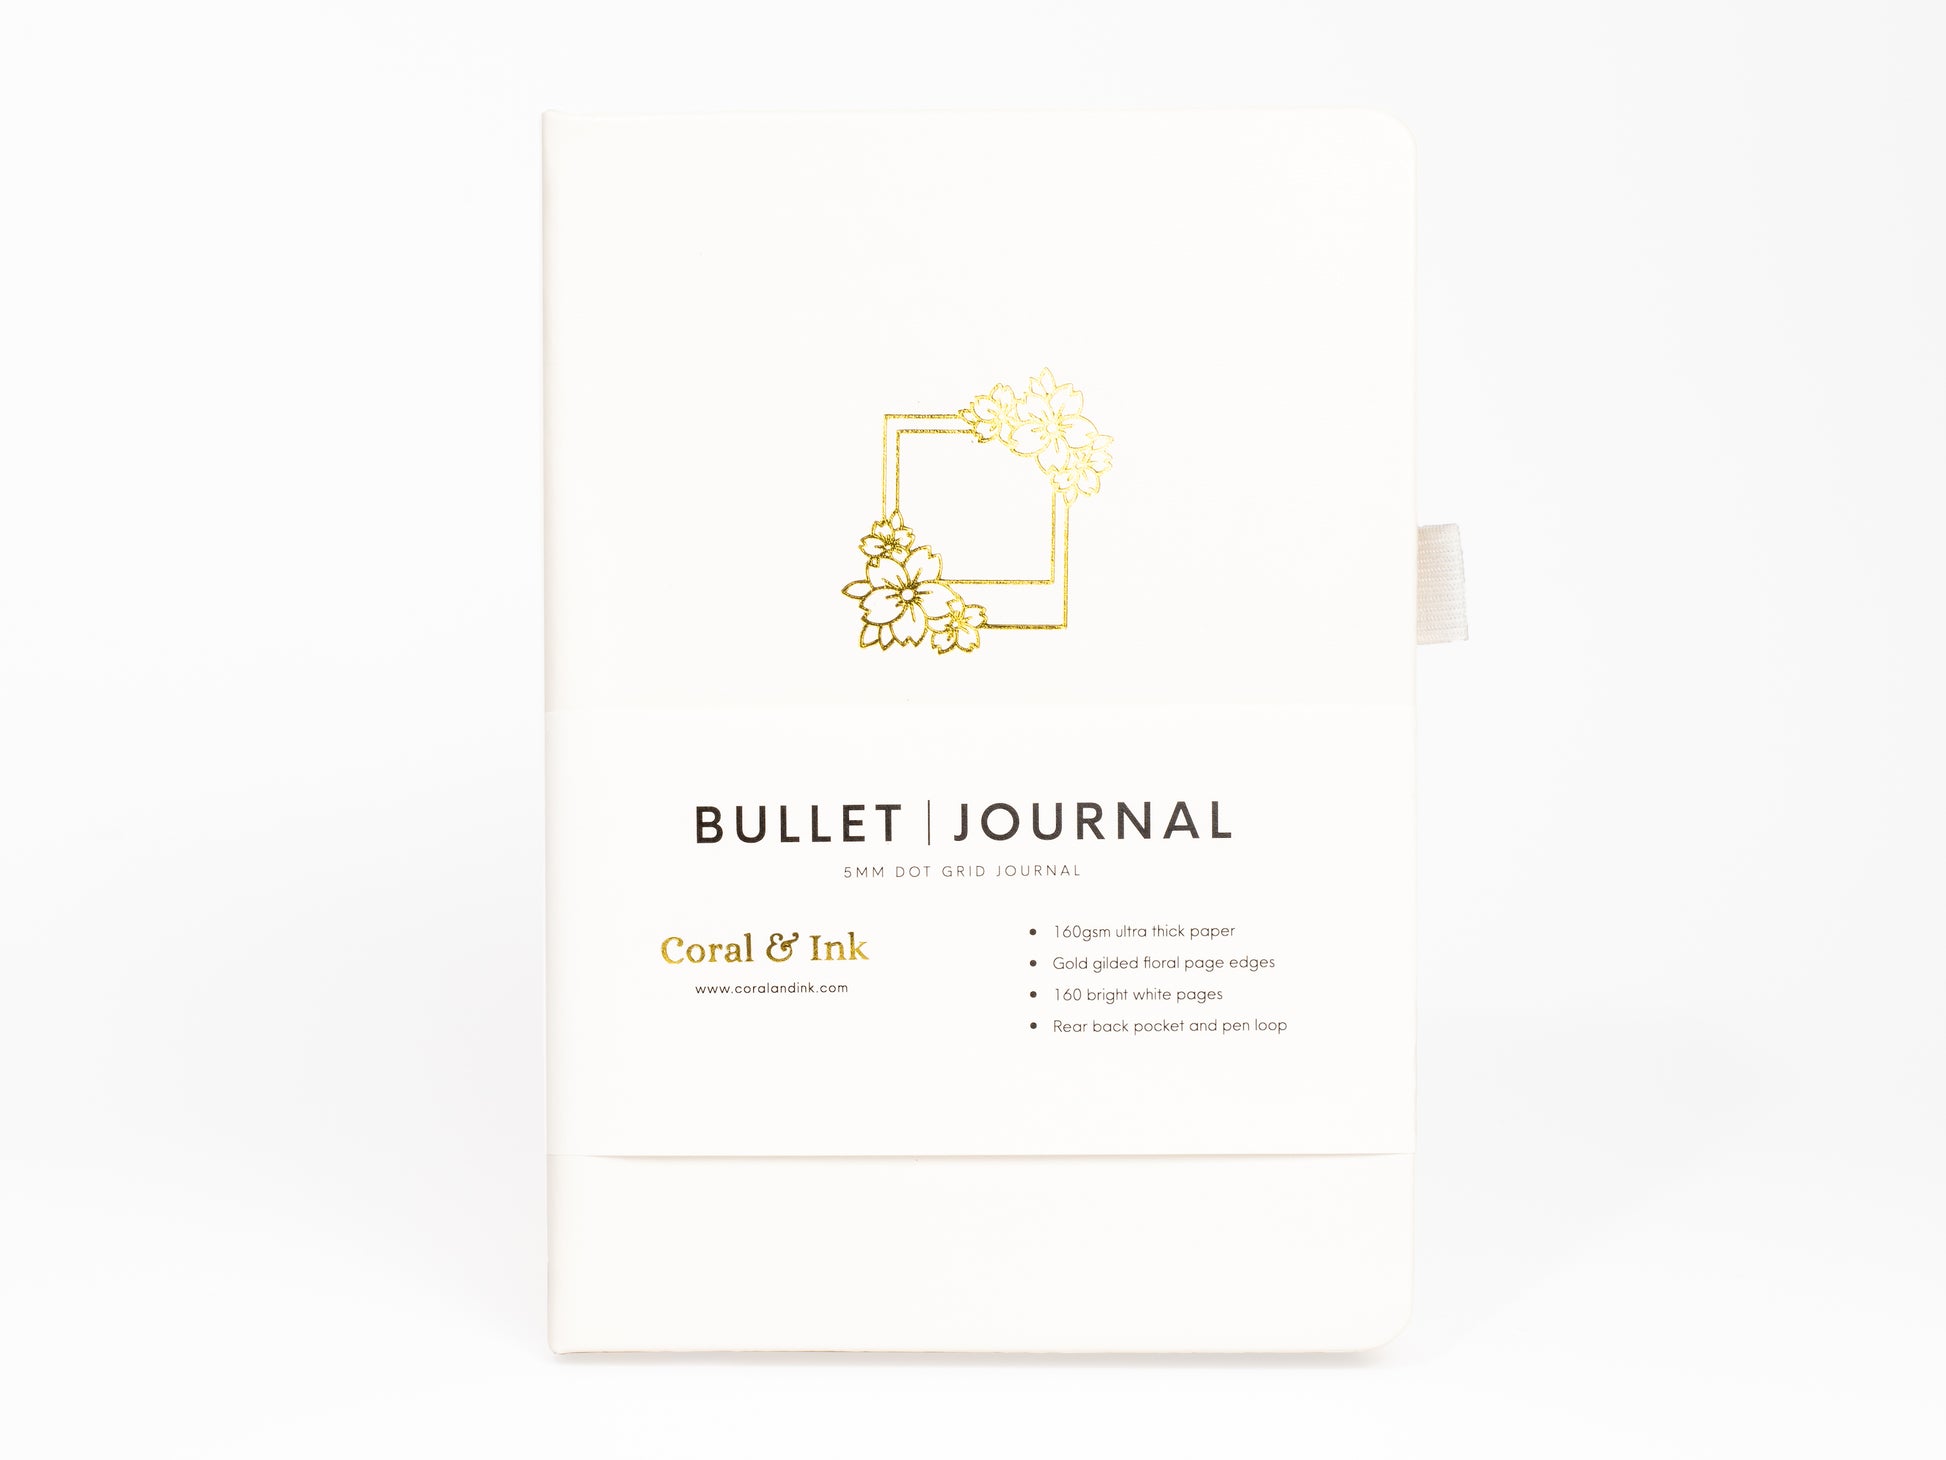 11 Game Changing Bullet Journal Supplies Under $10 ⋆ The Petite Planner